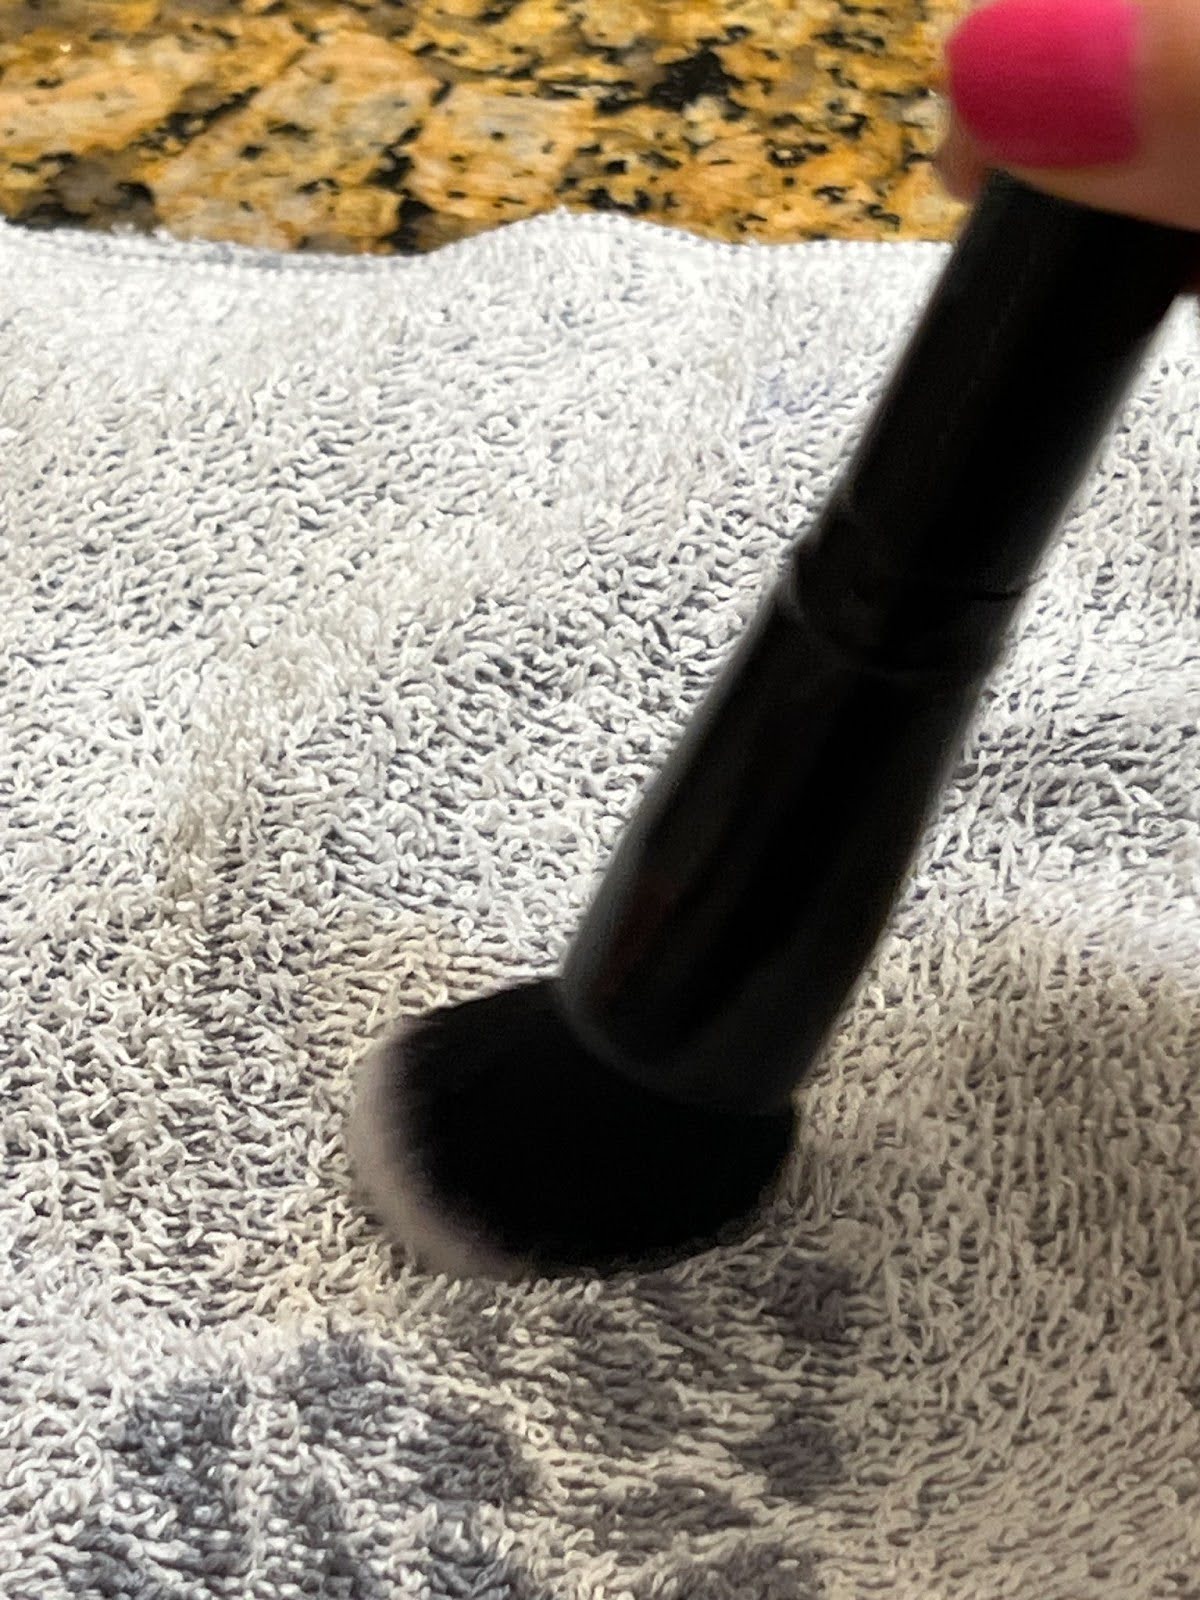 Gently rub the brush bristles on a dry towel (microfiber is best) to get rid of excess water.